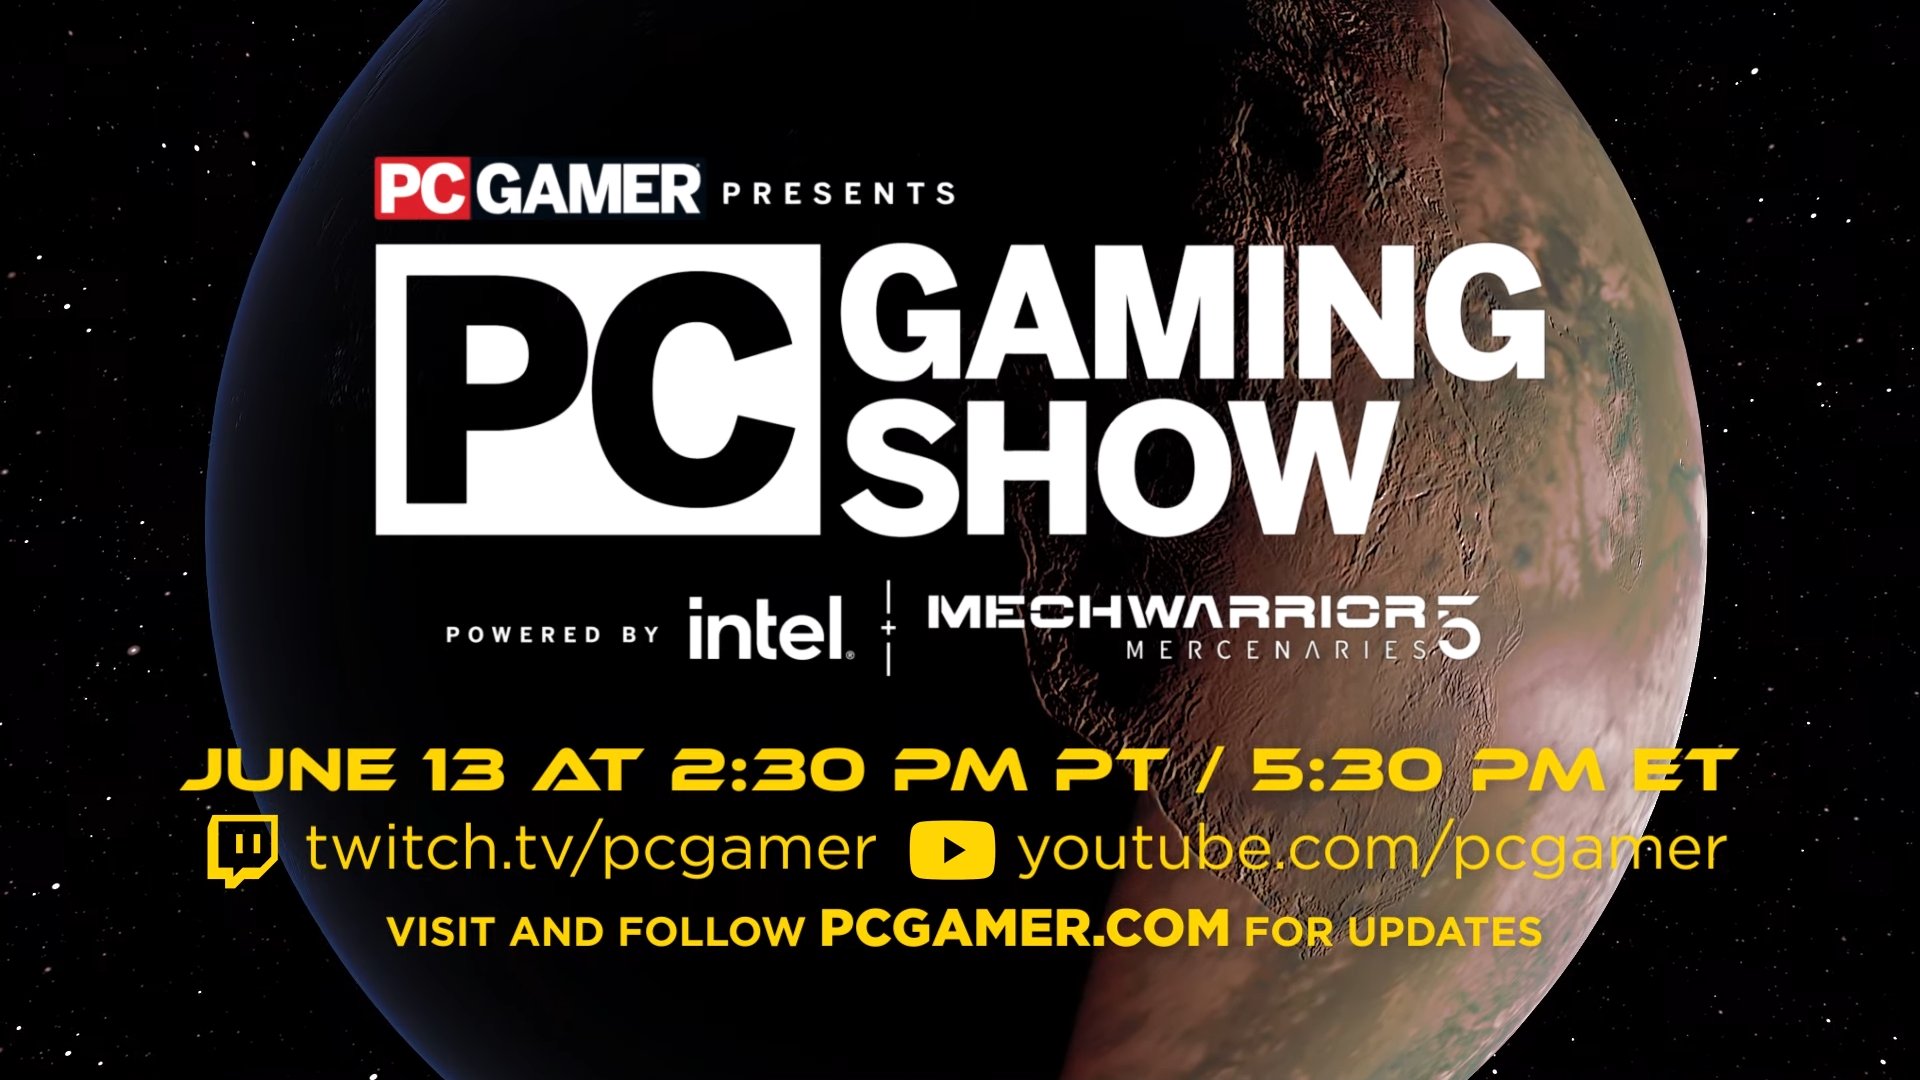 PC Gaming Show Returns to E3 2021 on June 13 MP1st